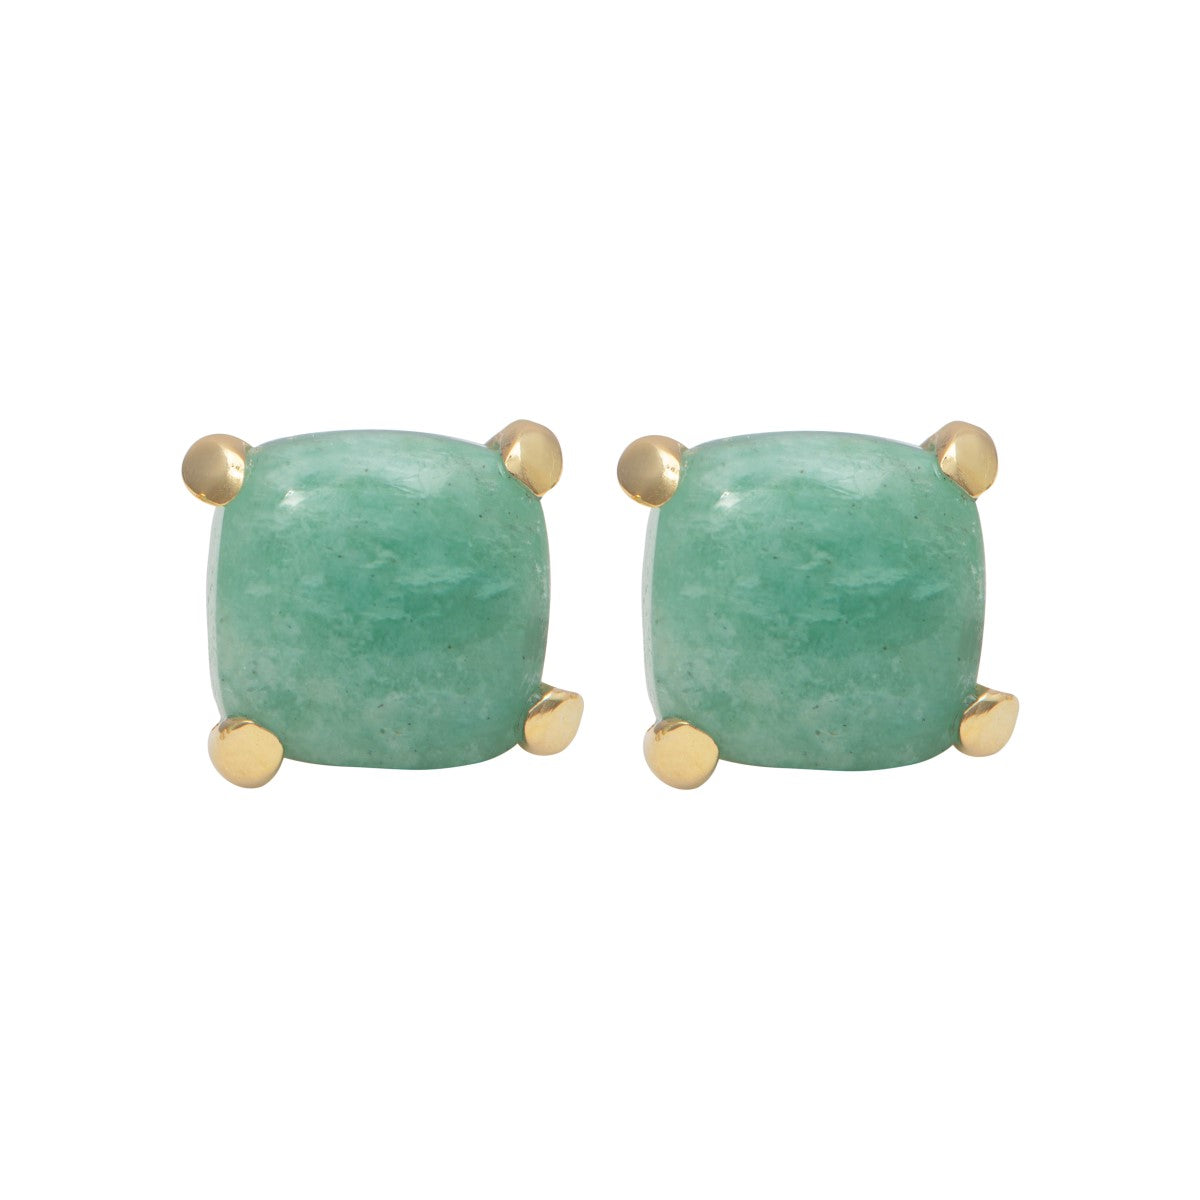 Square Cabochon Amazonite Stud Earrings in Gold Plated Sterling Silver